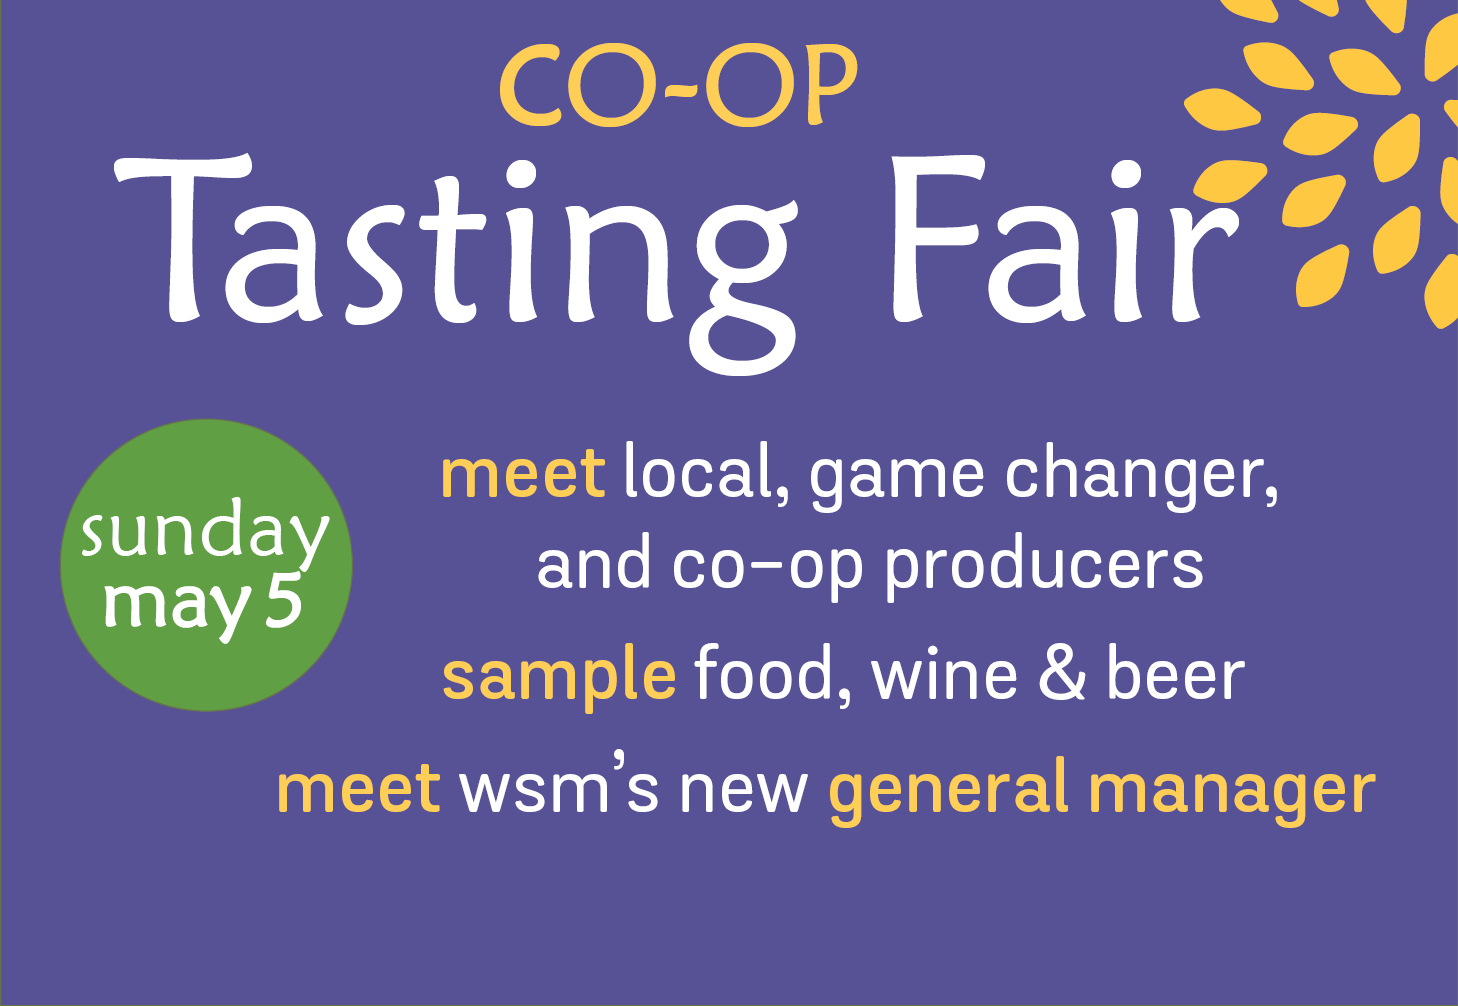 Save the Date: Co-op Tasting Fair